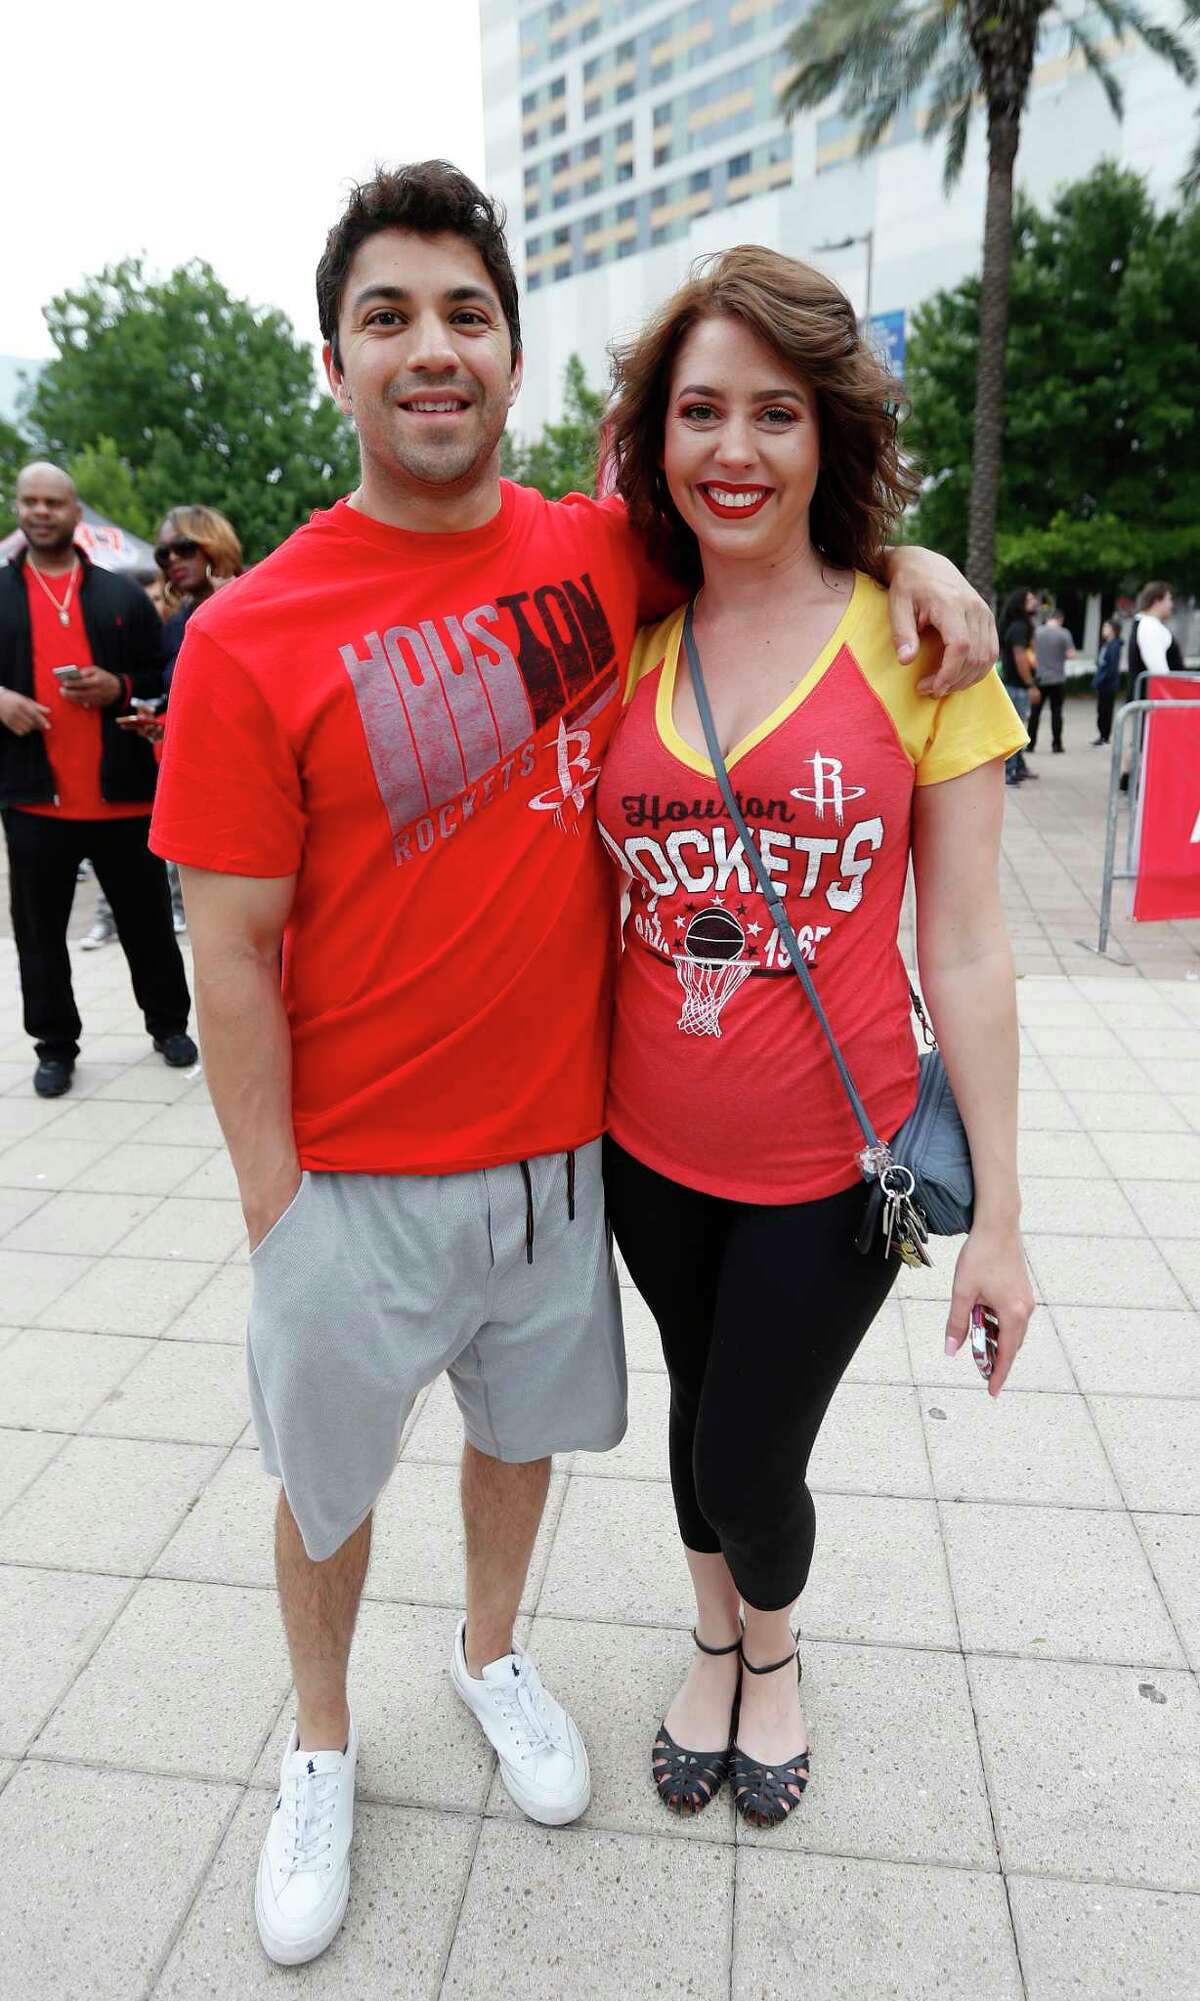 PHOTOS: Take a look at the Rockets fans outside Toyota Center before Tuesday night's Game 5 Fans wait to get into the Toyota Center before the start of Game 5 of a Western Conference quarterfinals of the 2017 NBA playoffs, April 24, 2017, in Houston.